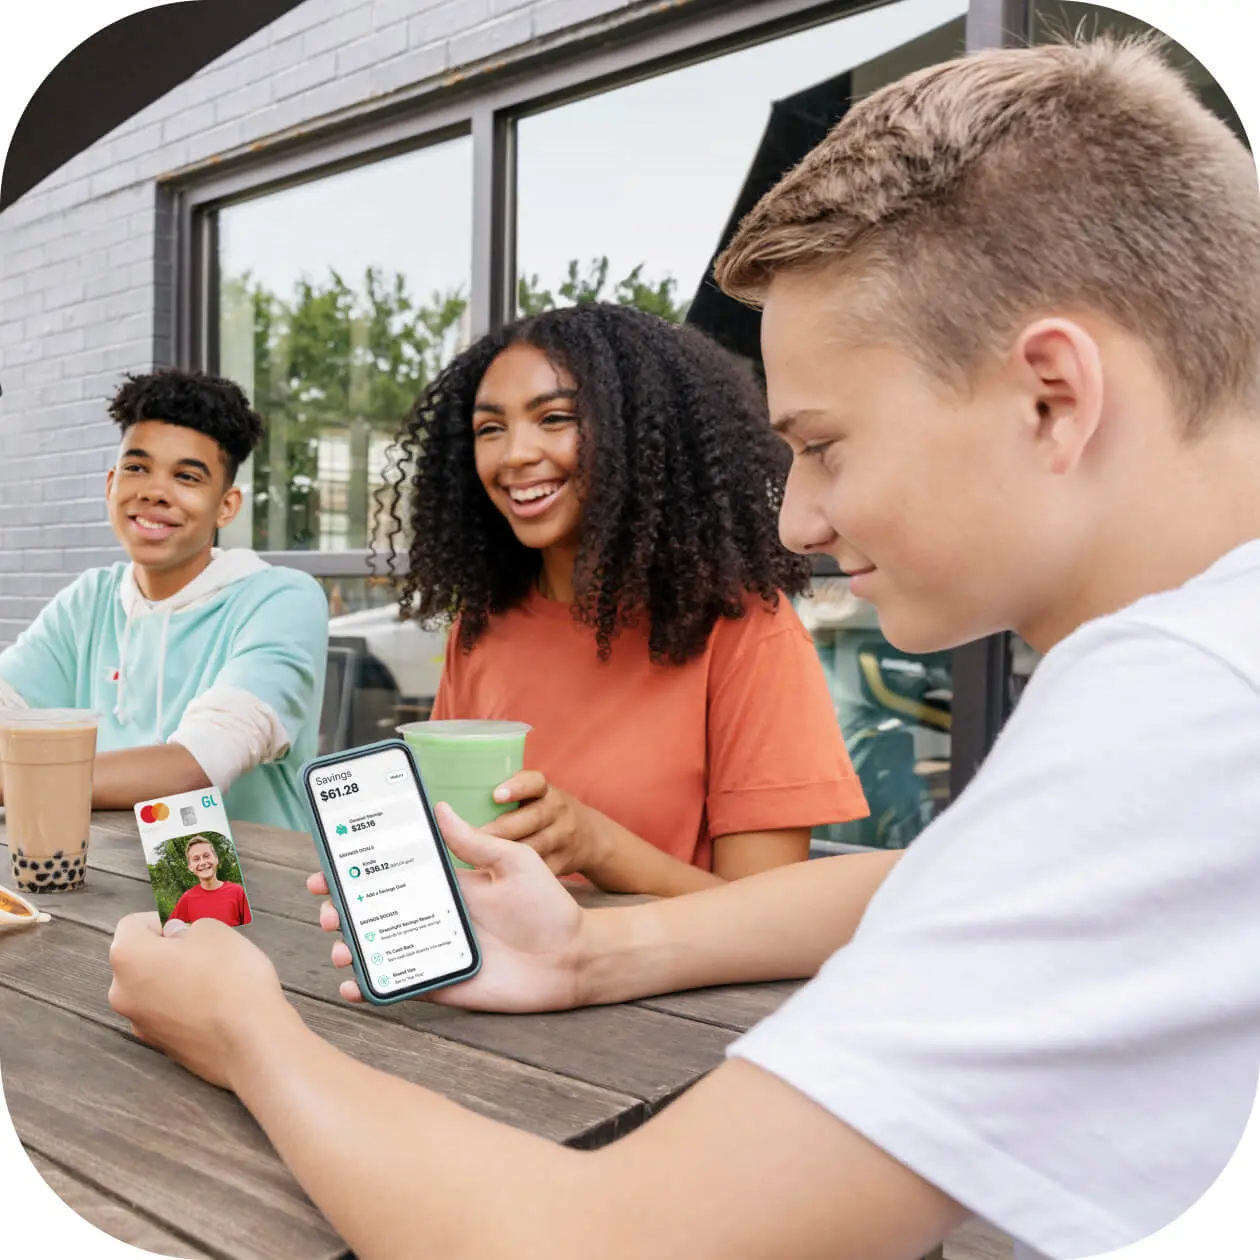 teenagers sitting at a table with one teen boy looking at his greenlight debit card and app